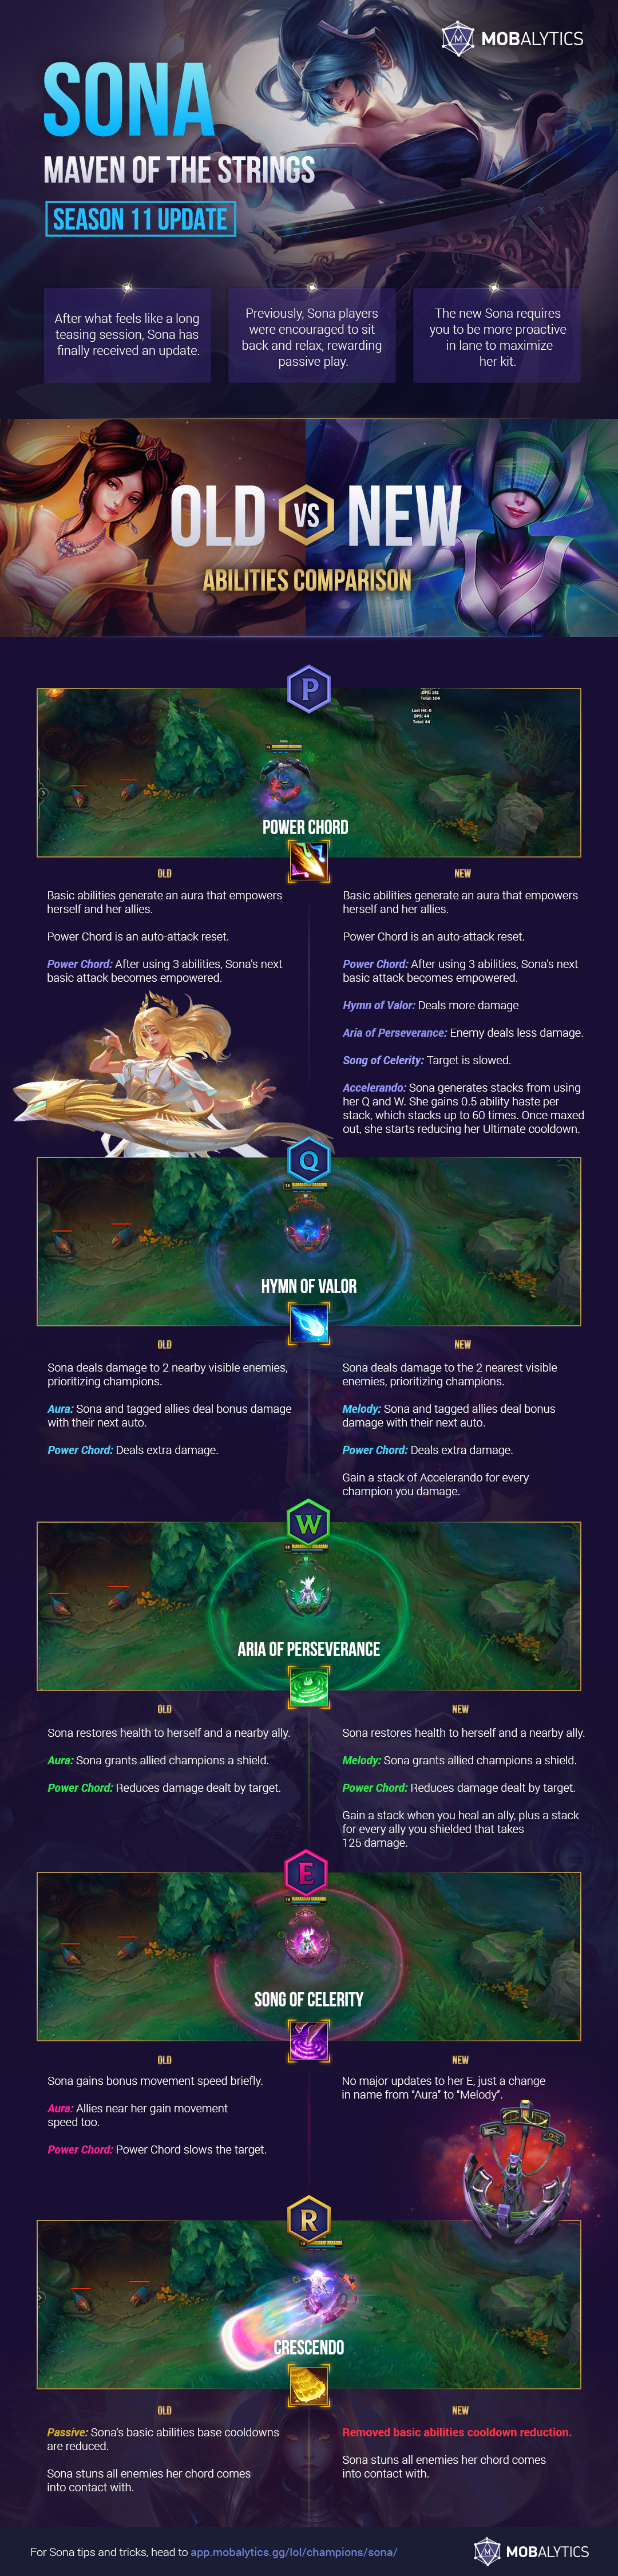 Season 11 Sona Update: Side-by-Side Ability Comparisons - Infographic